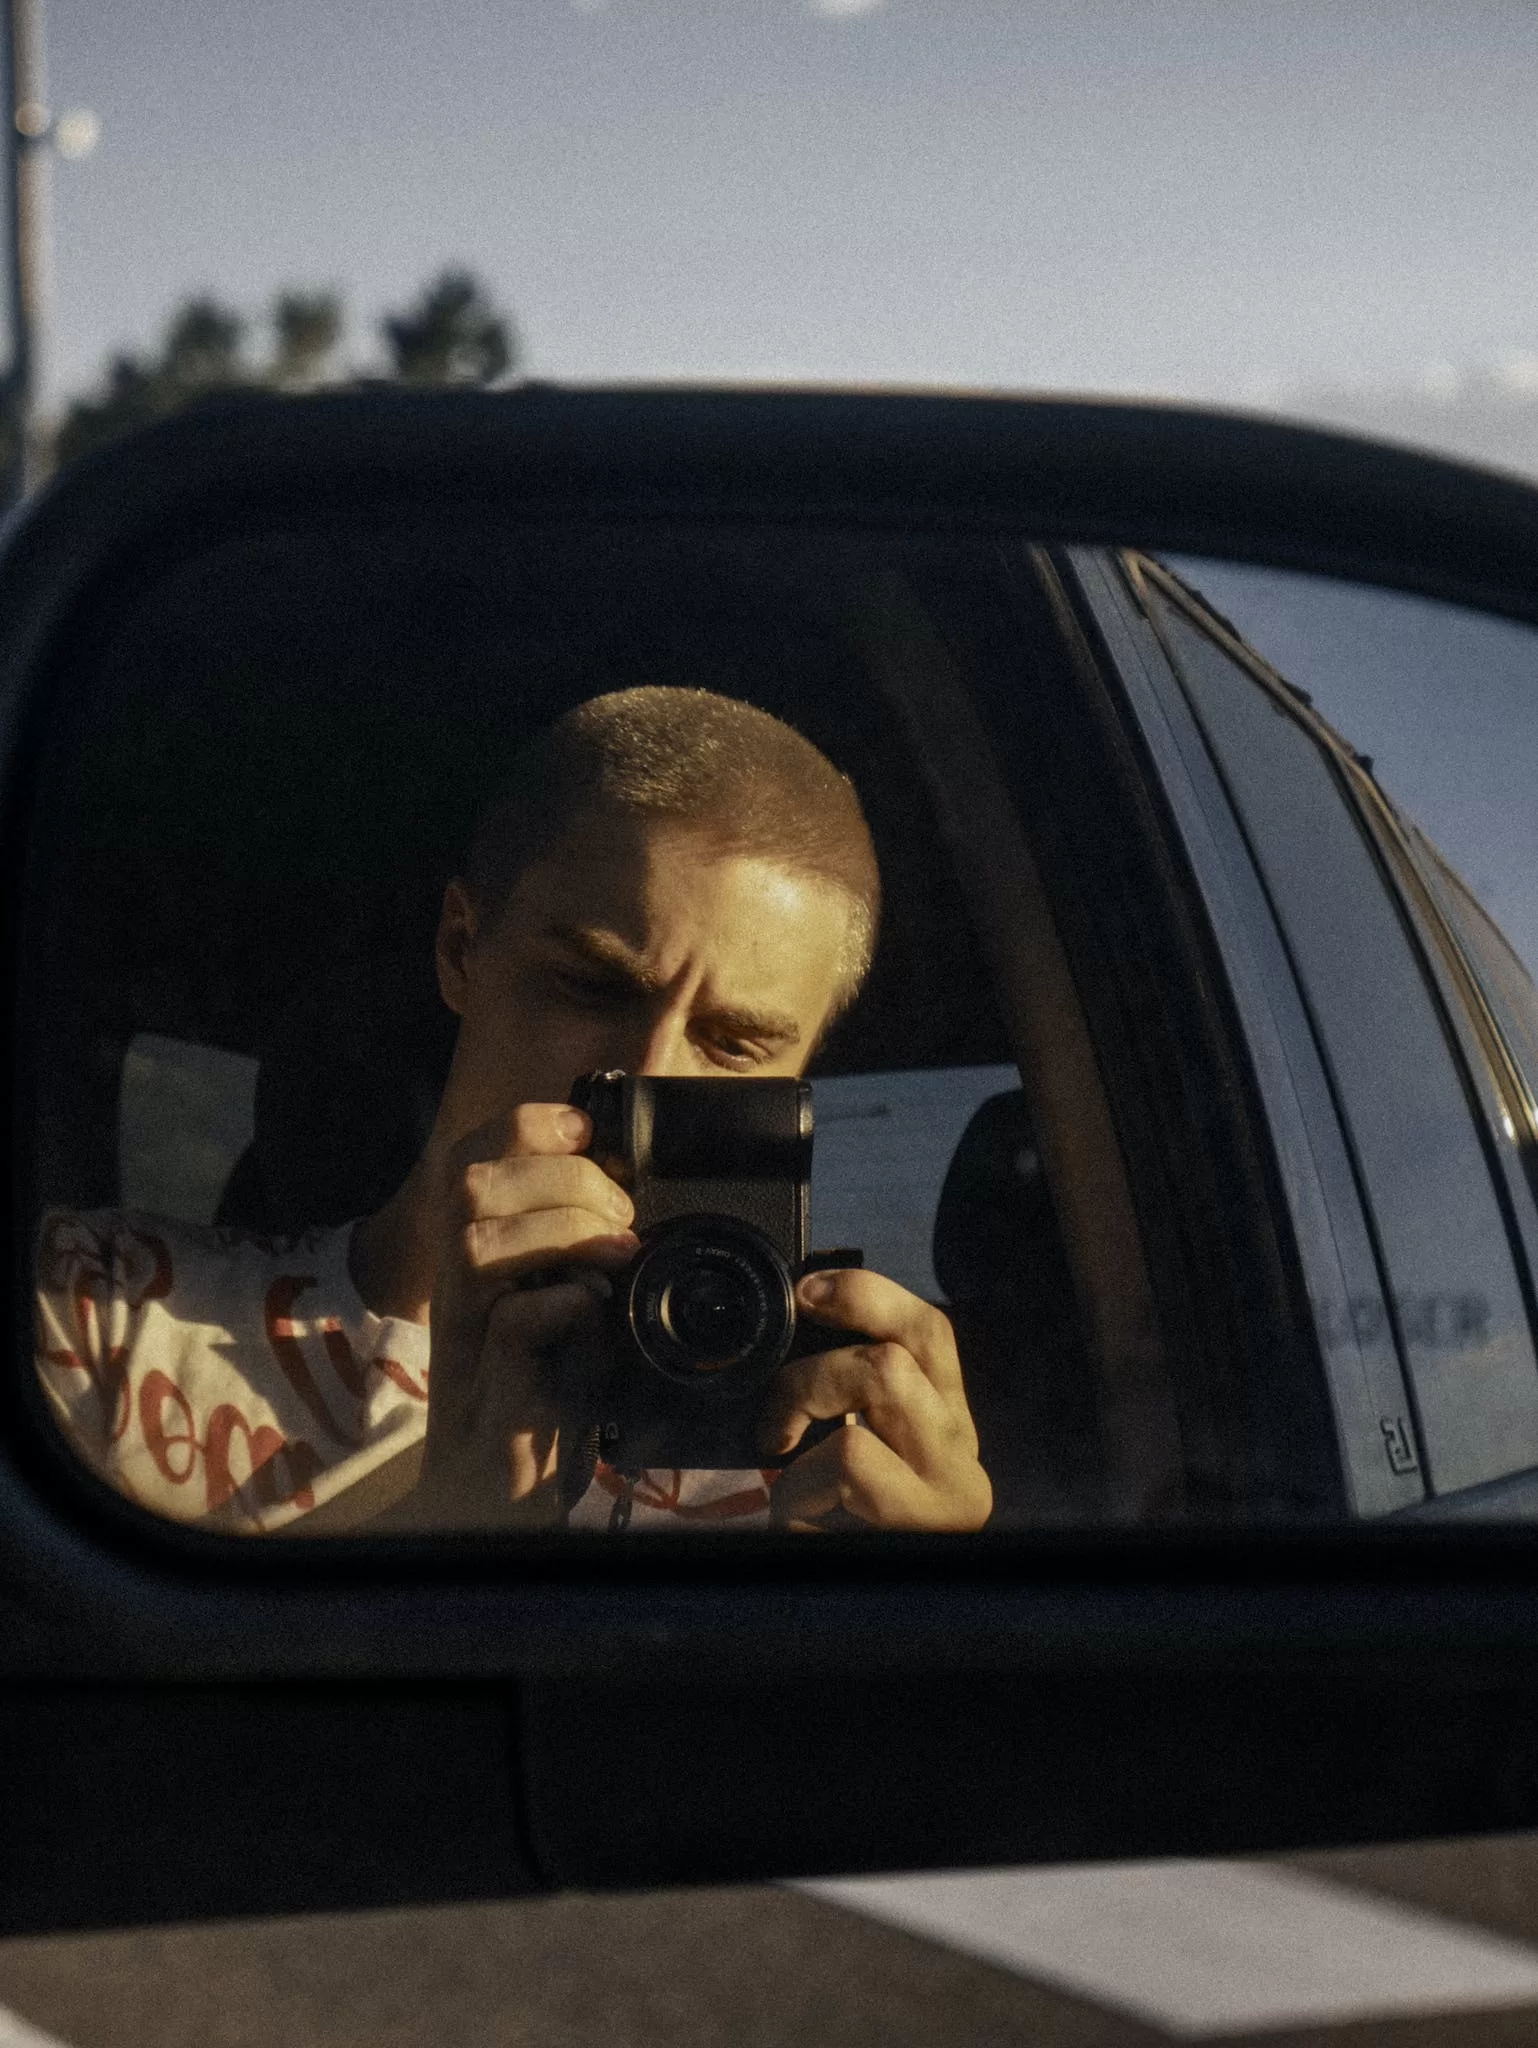 A Man Takes A Photo Reflection Of A Vehicle Side Mirror